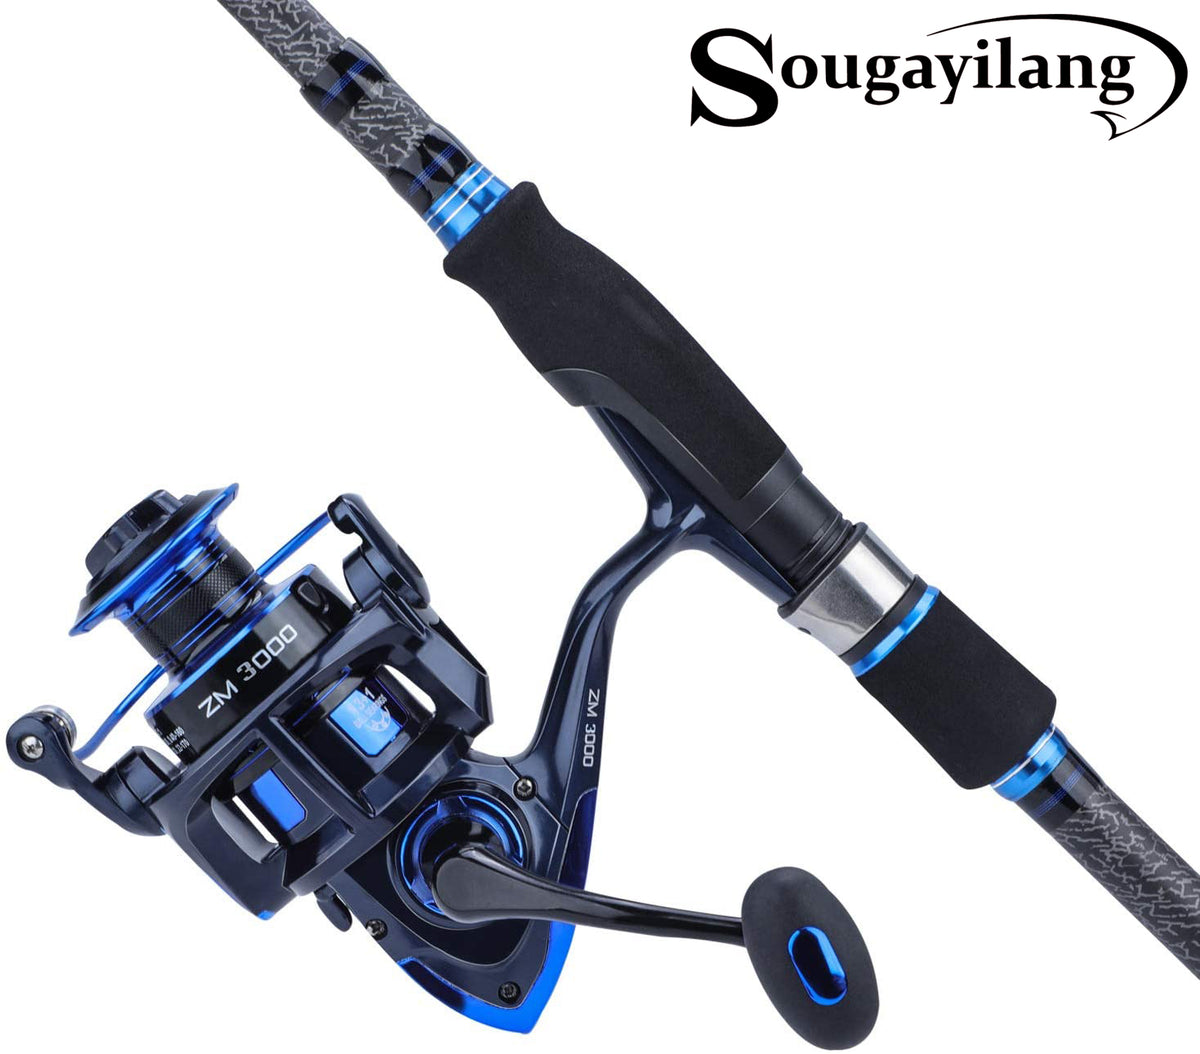 Sougayilang Telescopic Fishing Pole with Spinning Reel Full Kit & Carry Bag